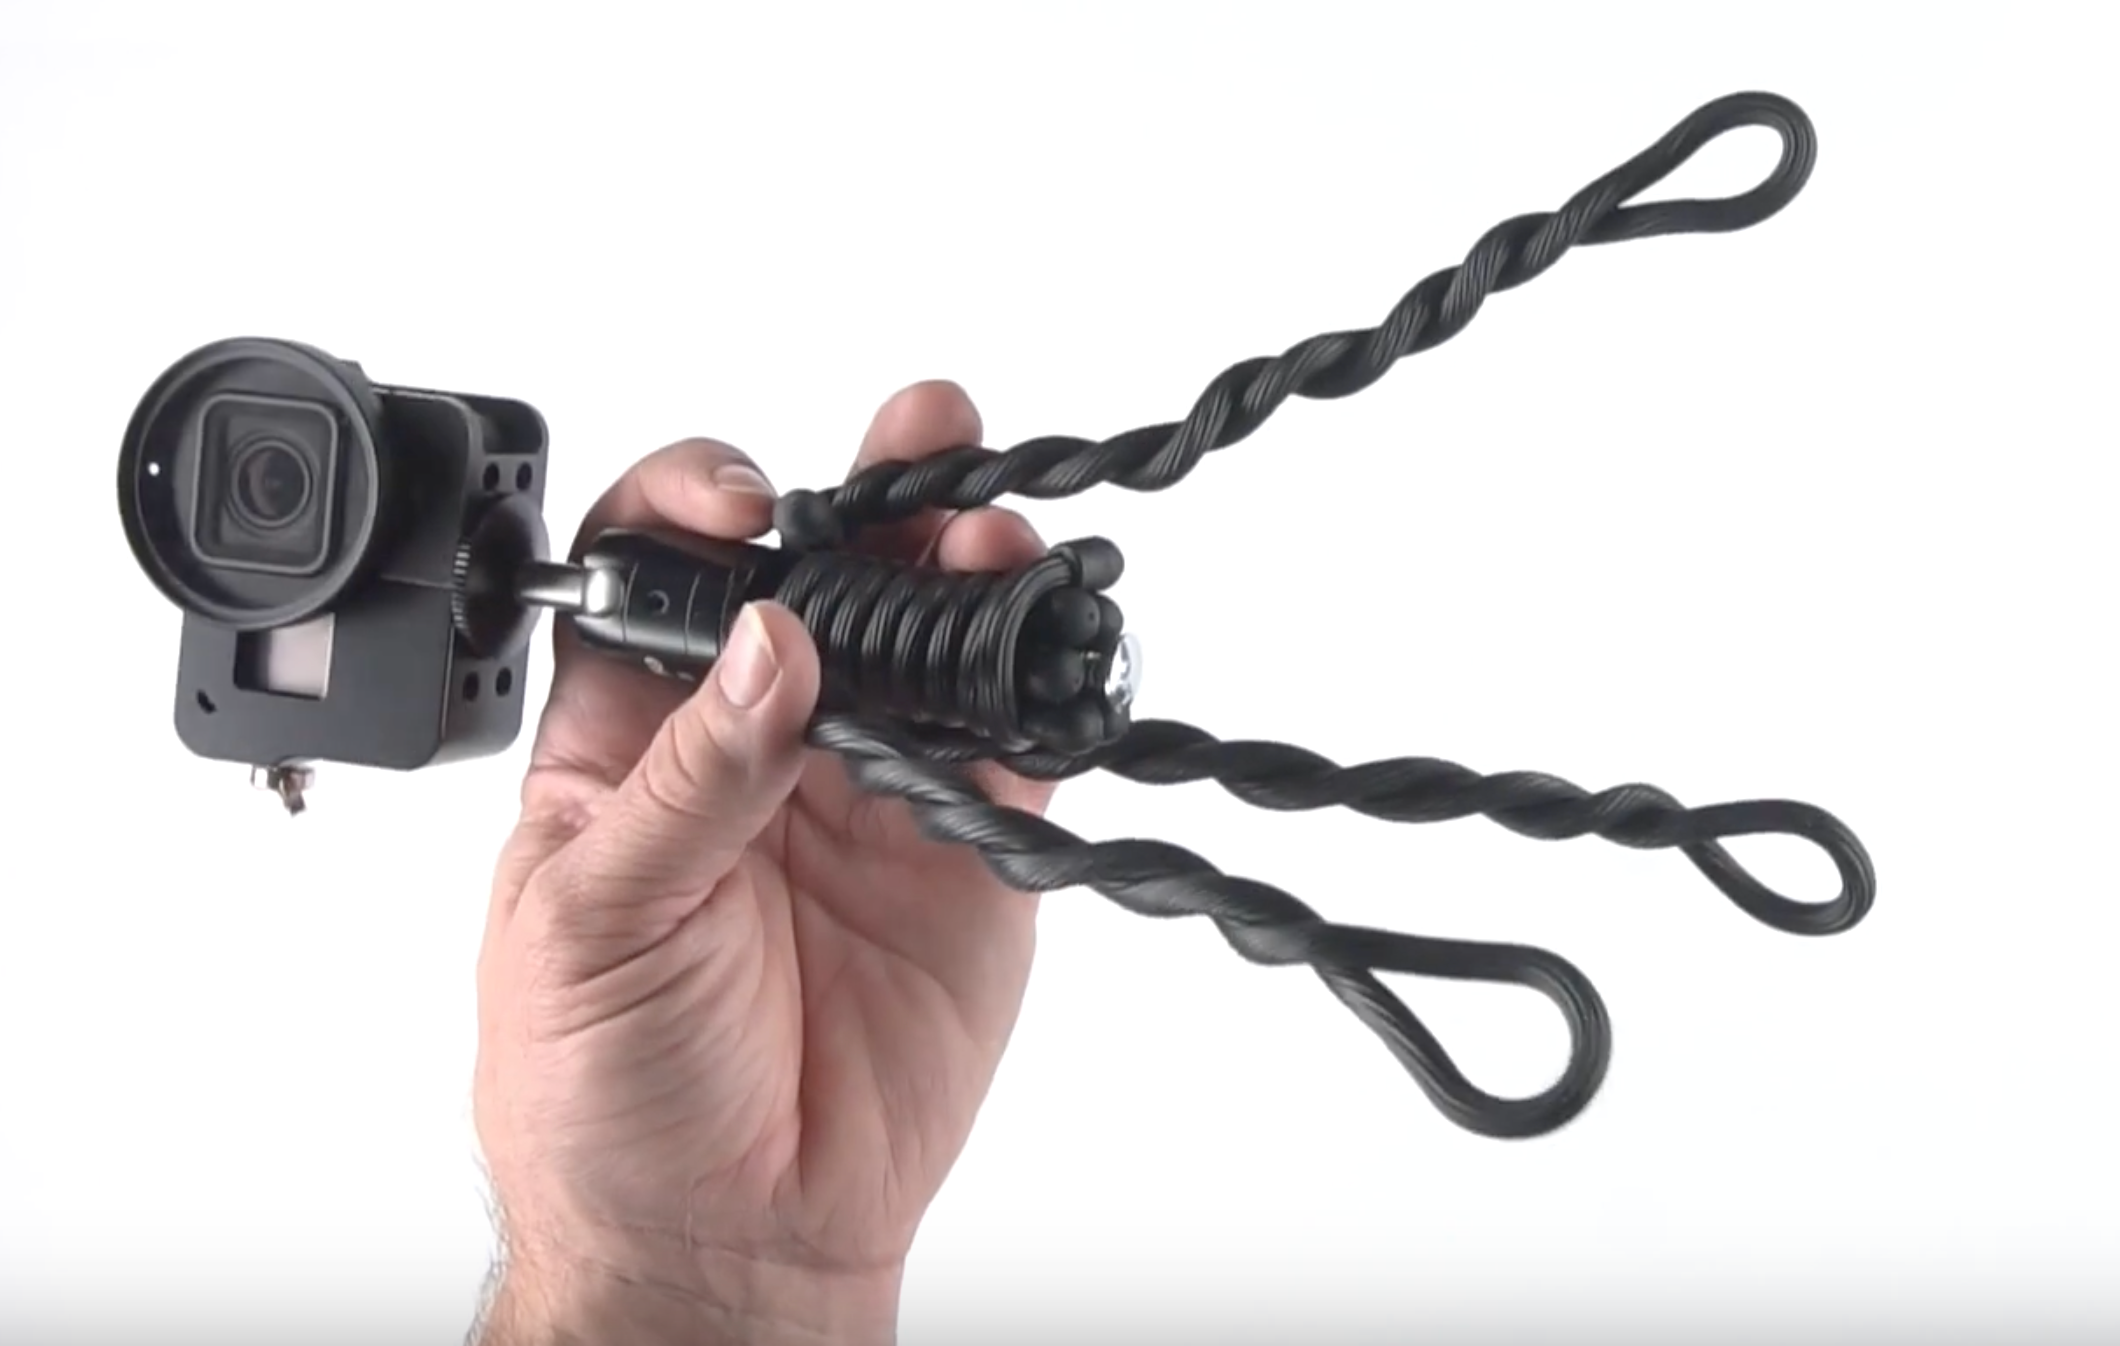 Watch: This DIY GorillaPod Is Easy, Fast, and Dirt Cheap to Make